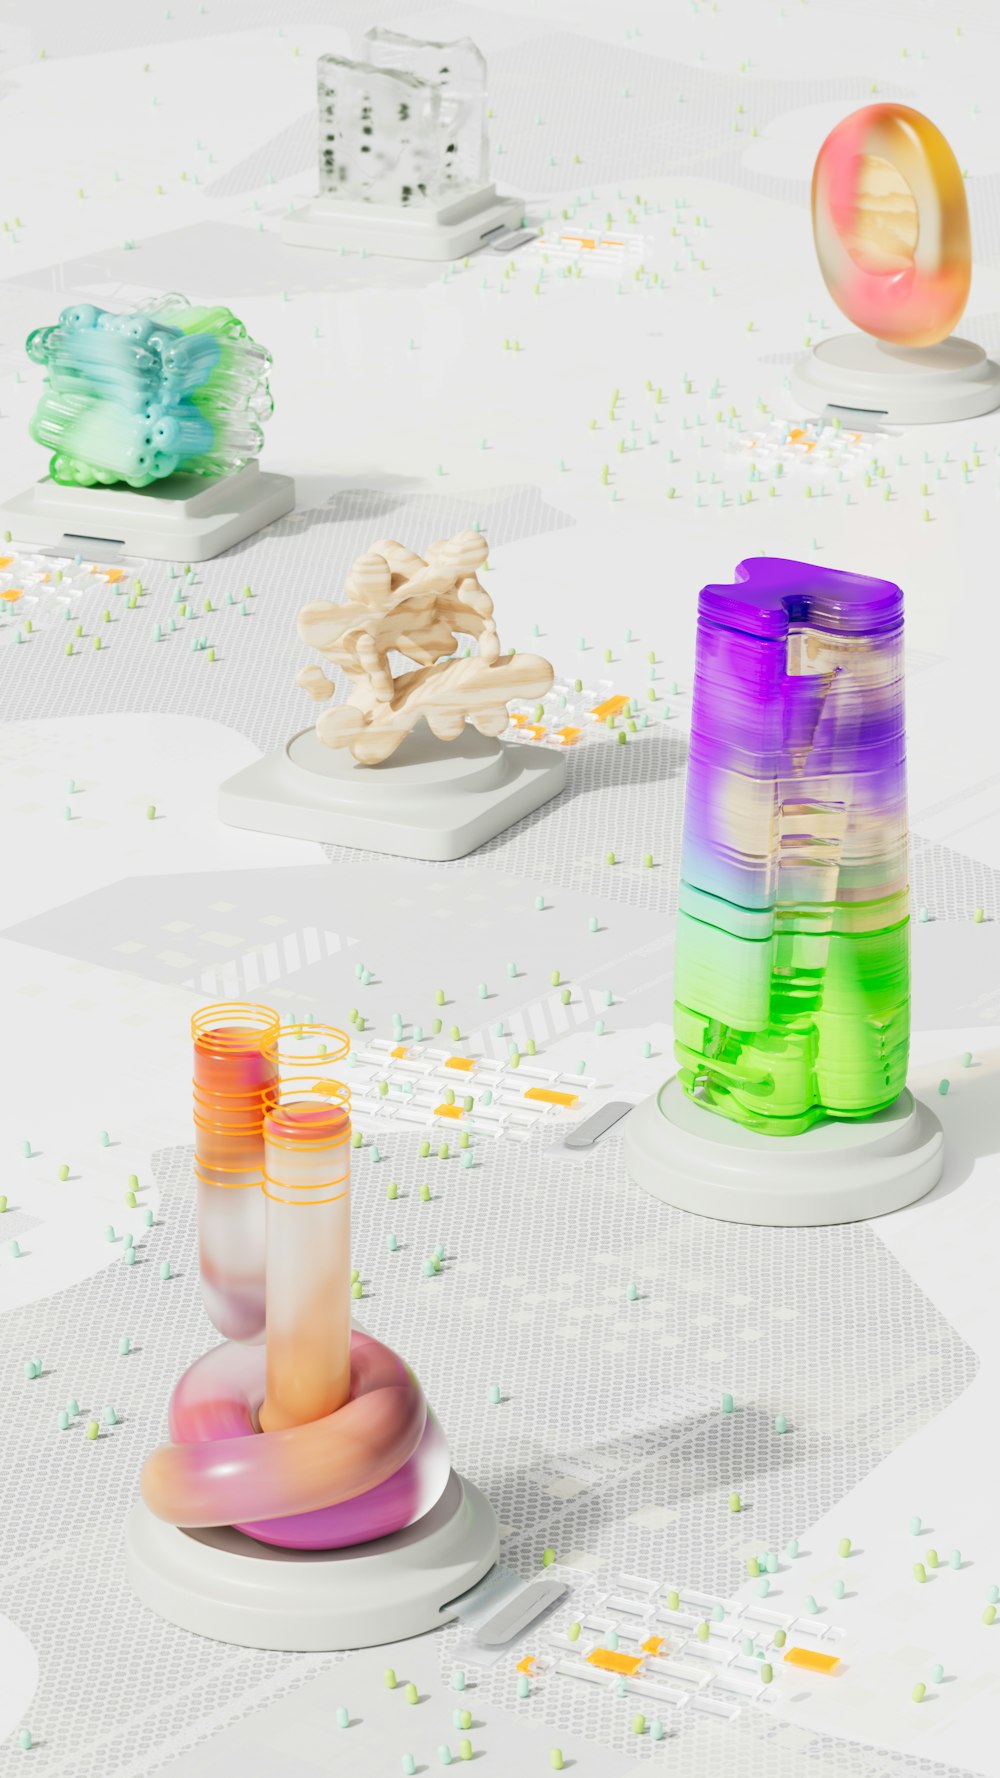 a group of different colored objects on a table